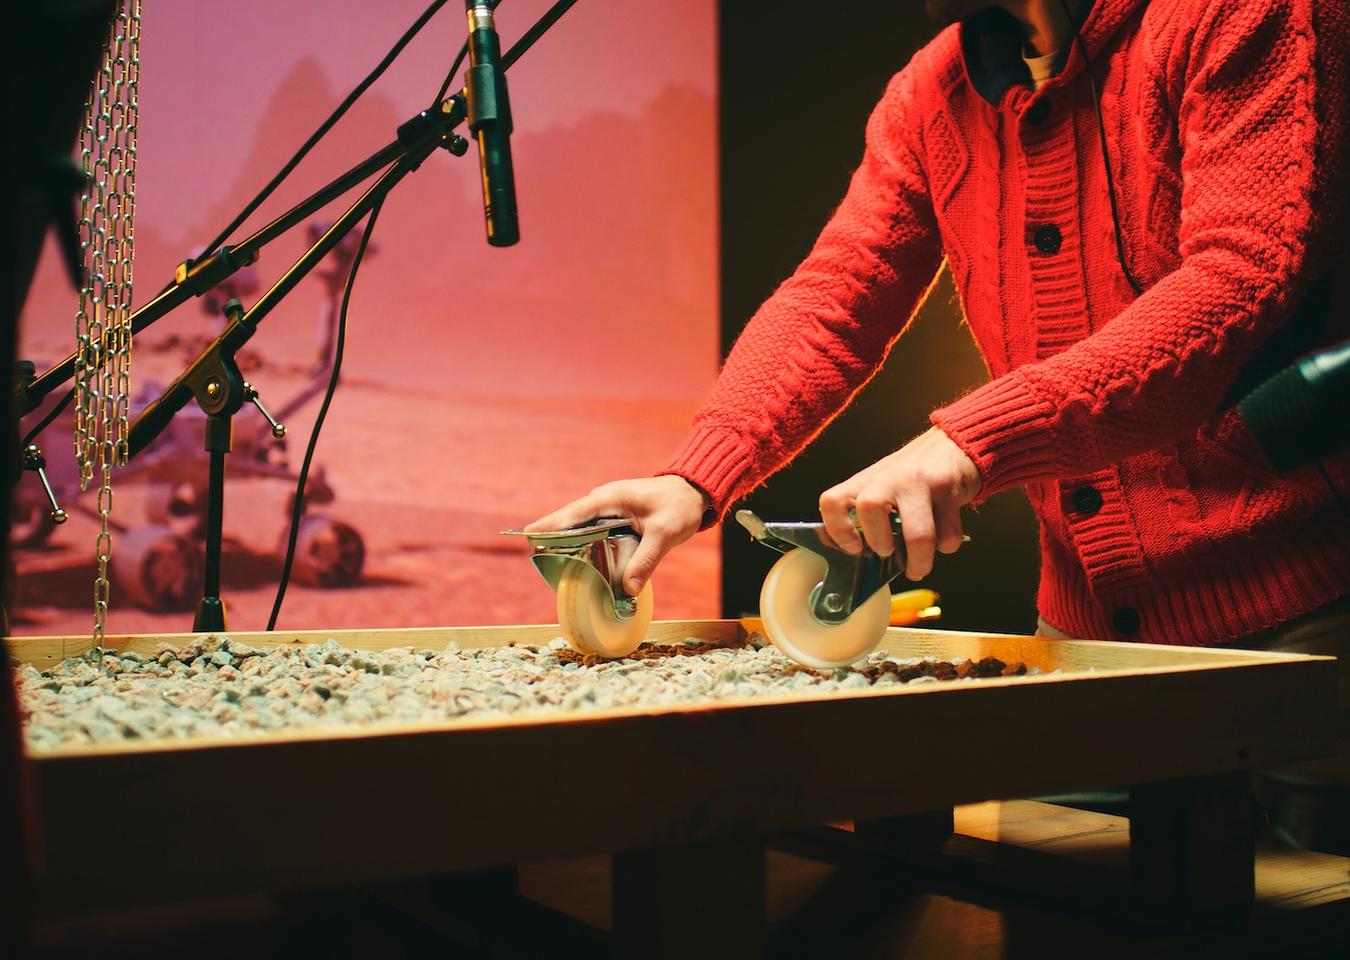 The Weird, Analog Delights of Foley Sound Effects